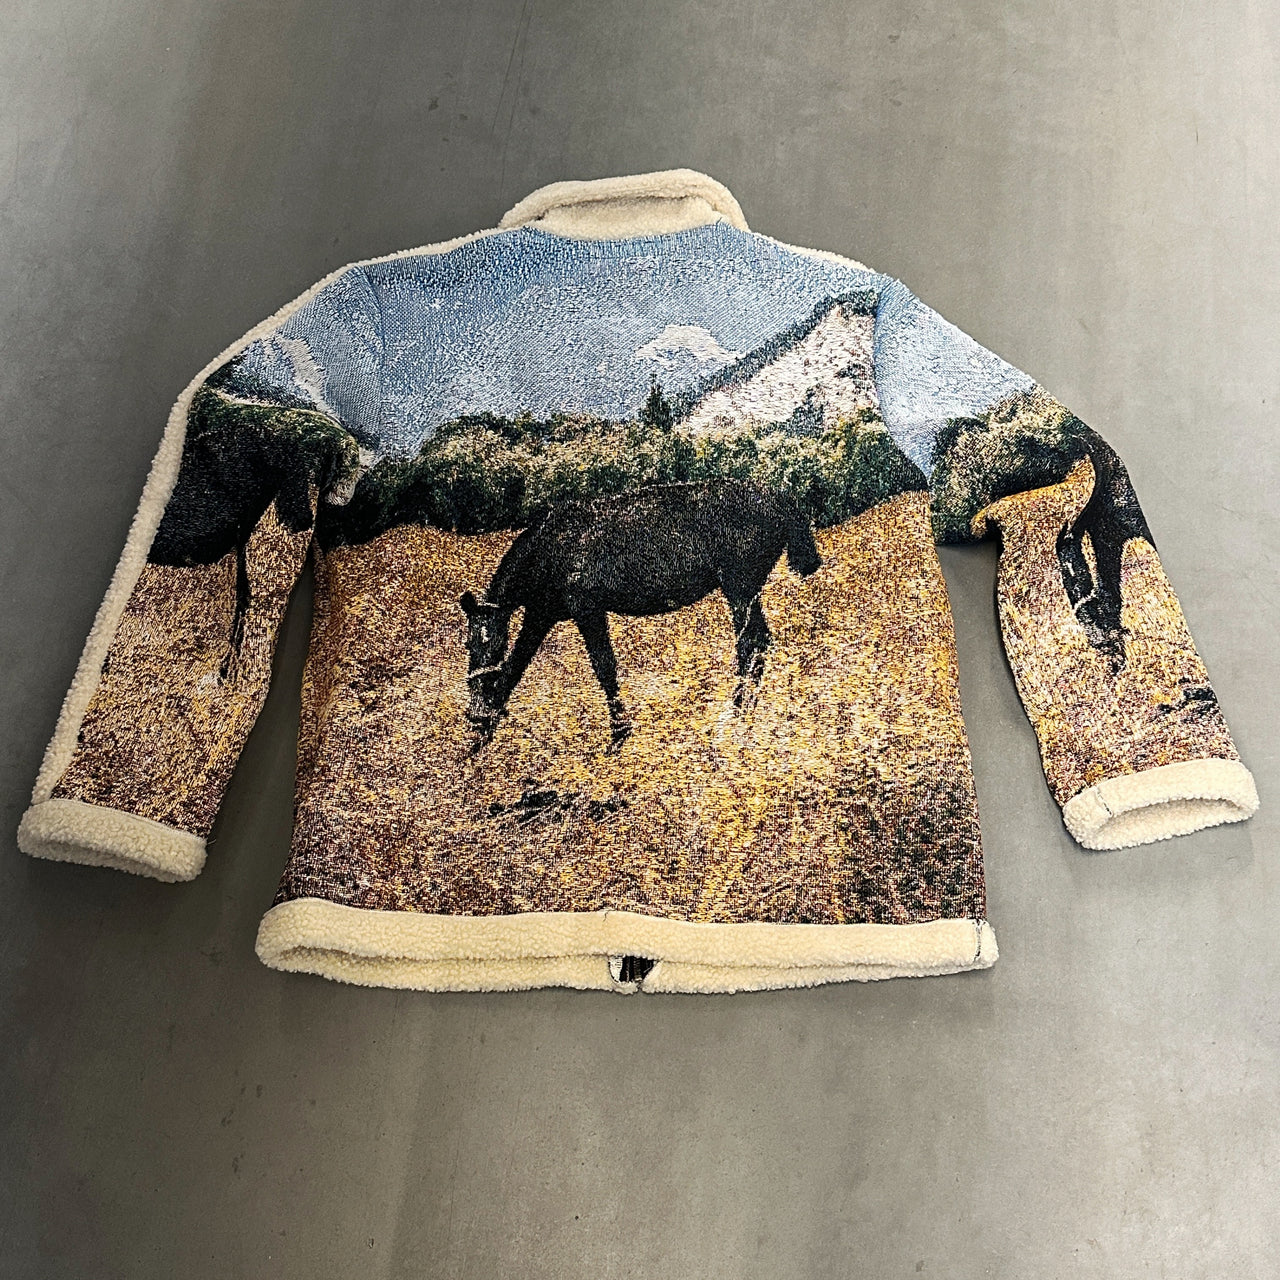 "IN THE MOUNTAINS" - SHERPA JACKET